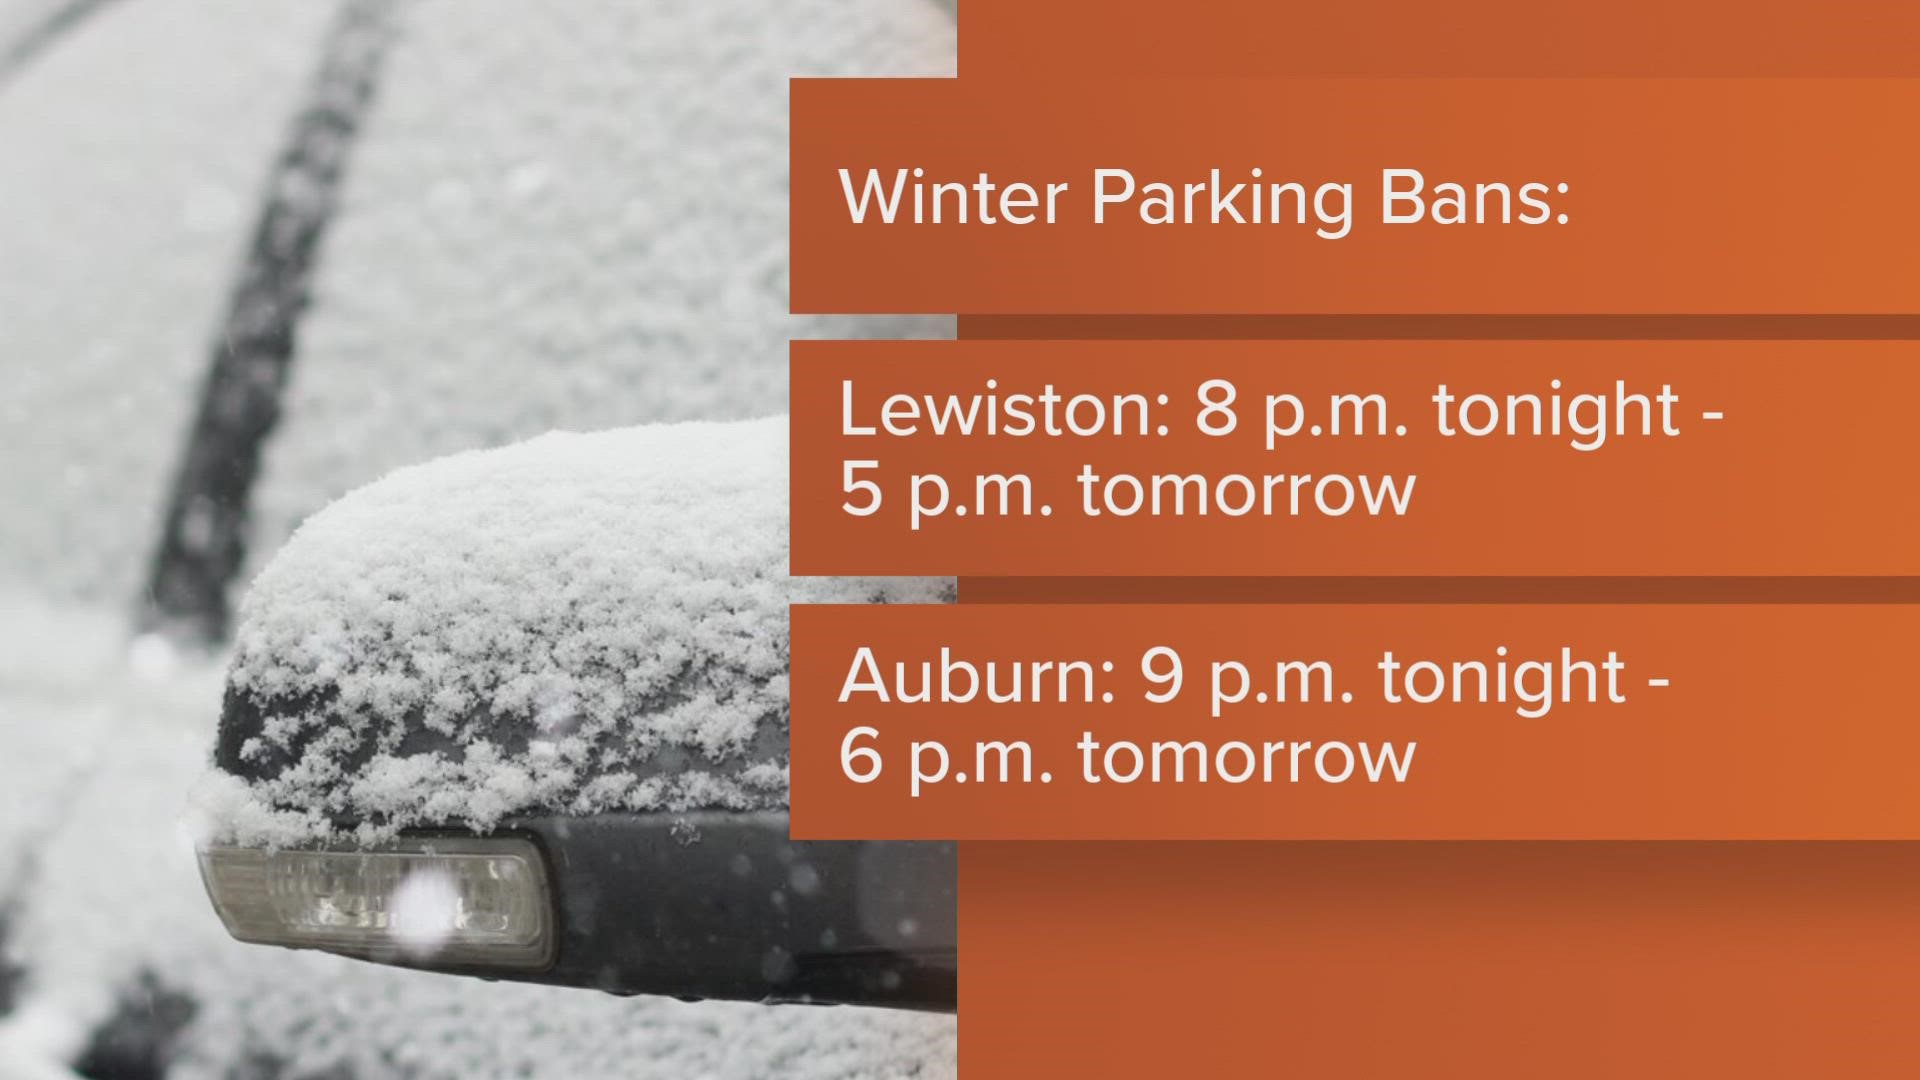 The cities of Auburn and Lewiston have winter parking bans going into effect Sunday, Jan. 22 through Monday, Jan. 23.